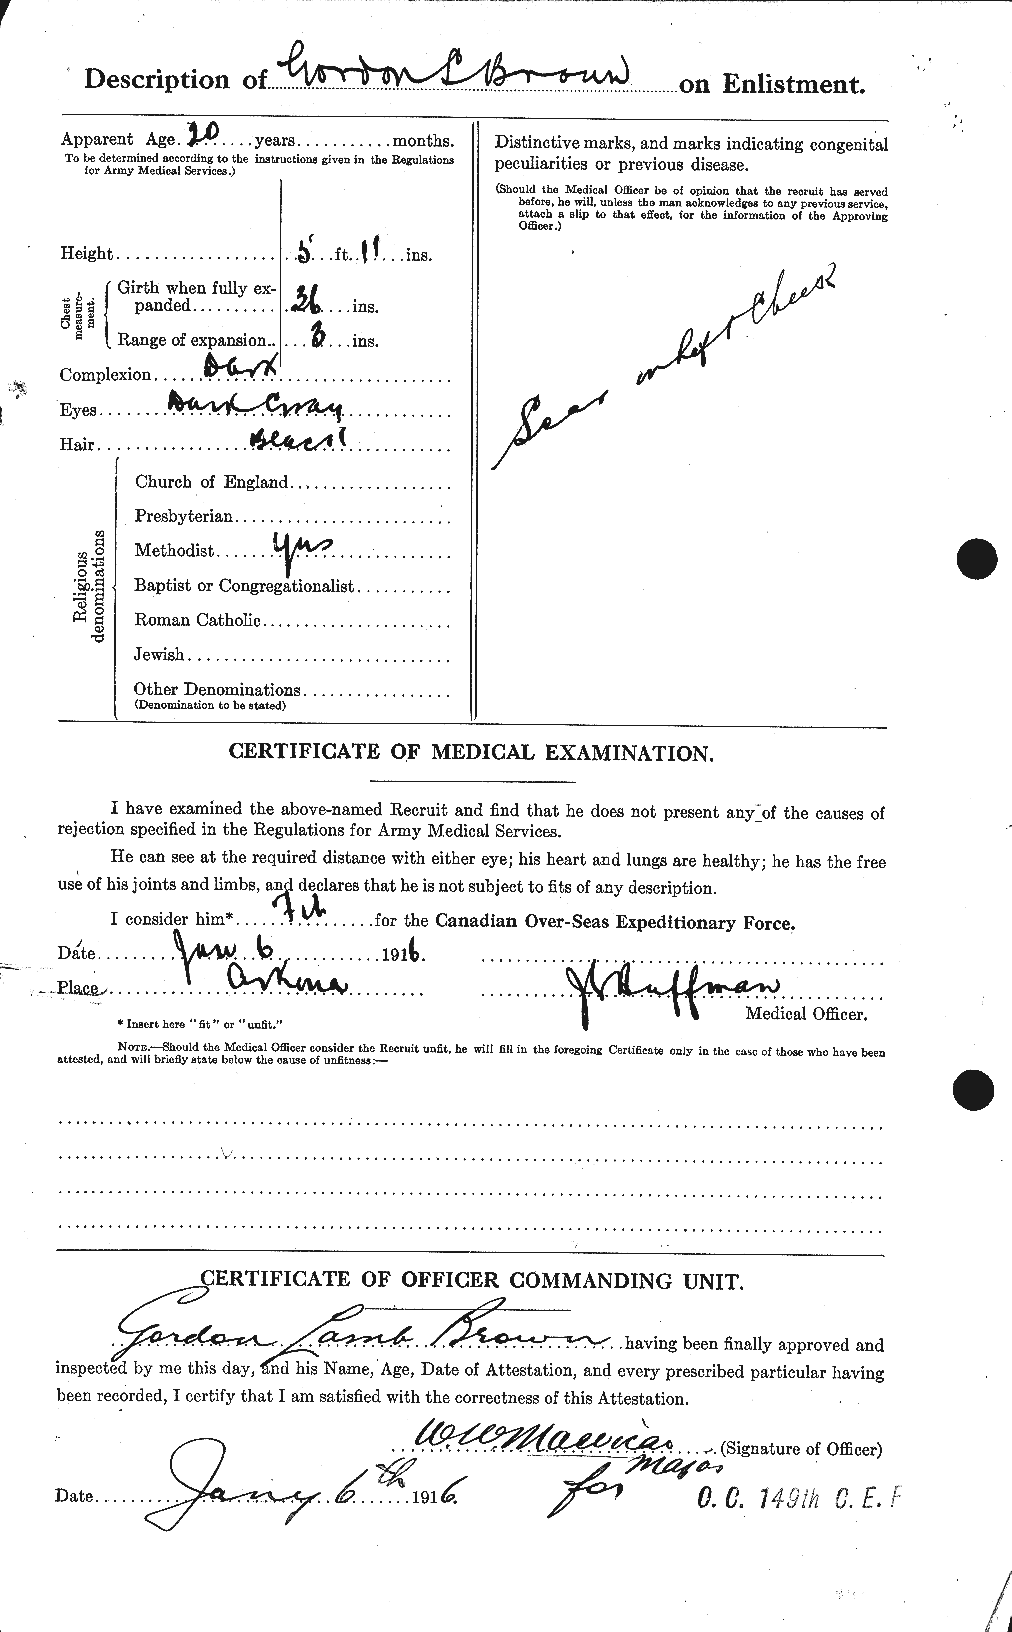 Personnel Records of the First World War - CEF 262639b